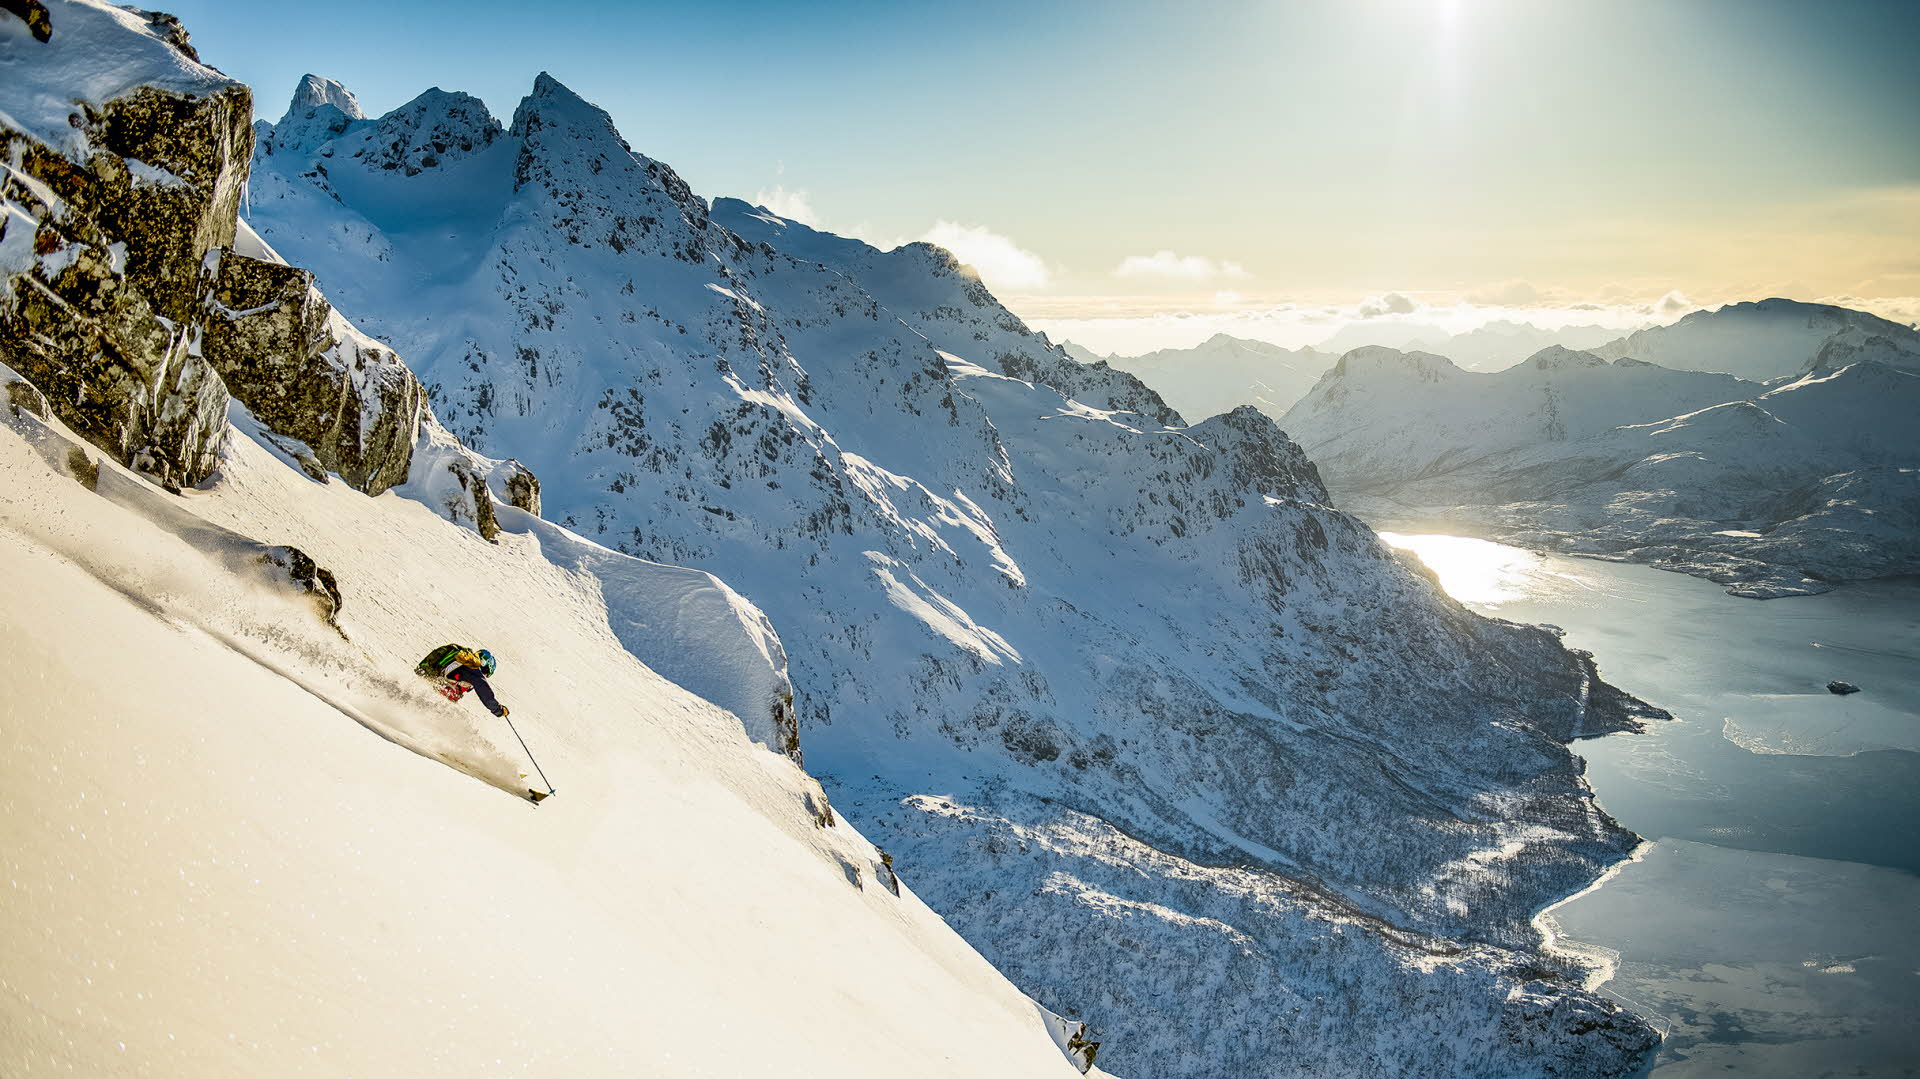 A person skiing down a mountain in fresh snow. Sea below and mountain ranges surrounding.